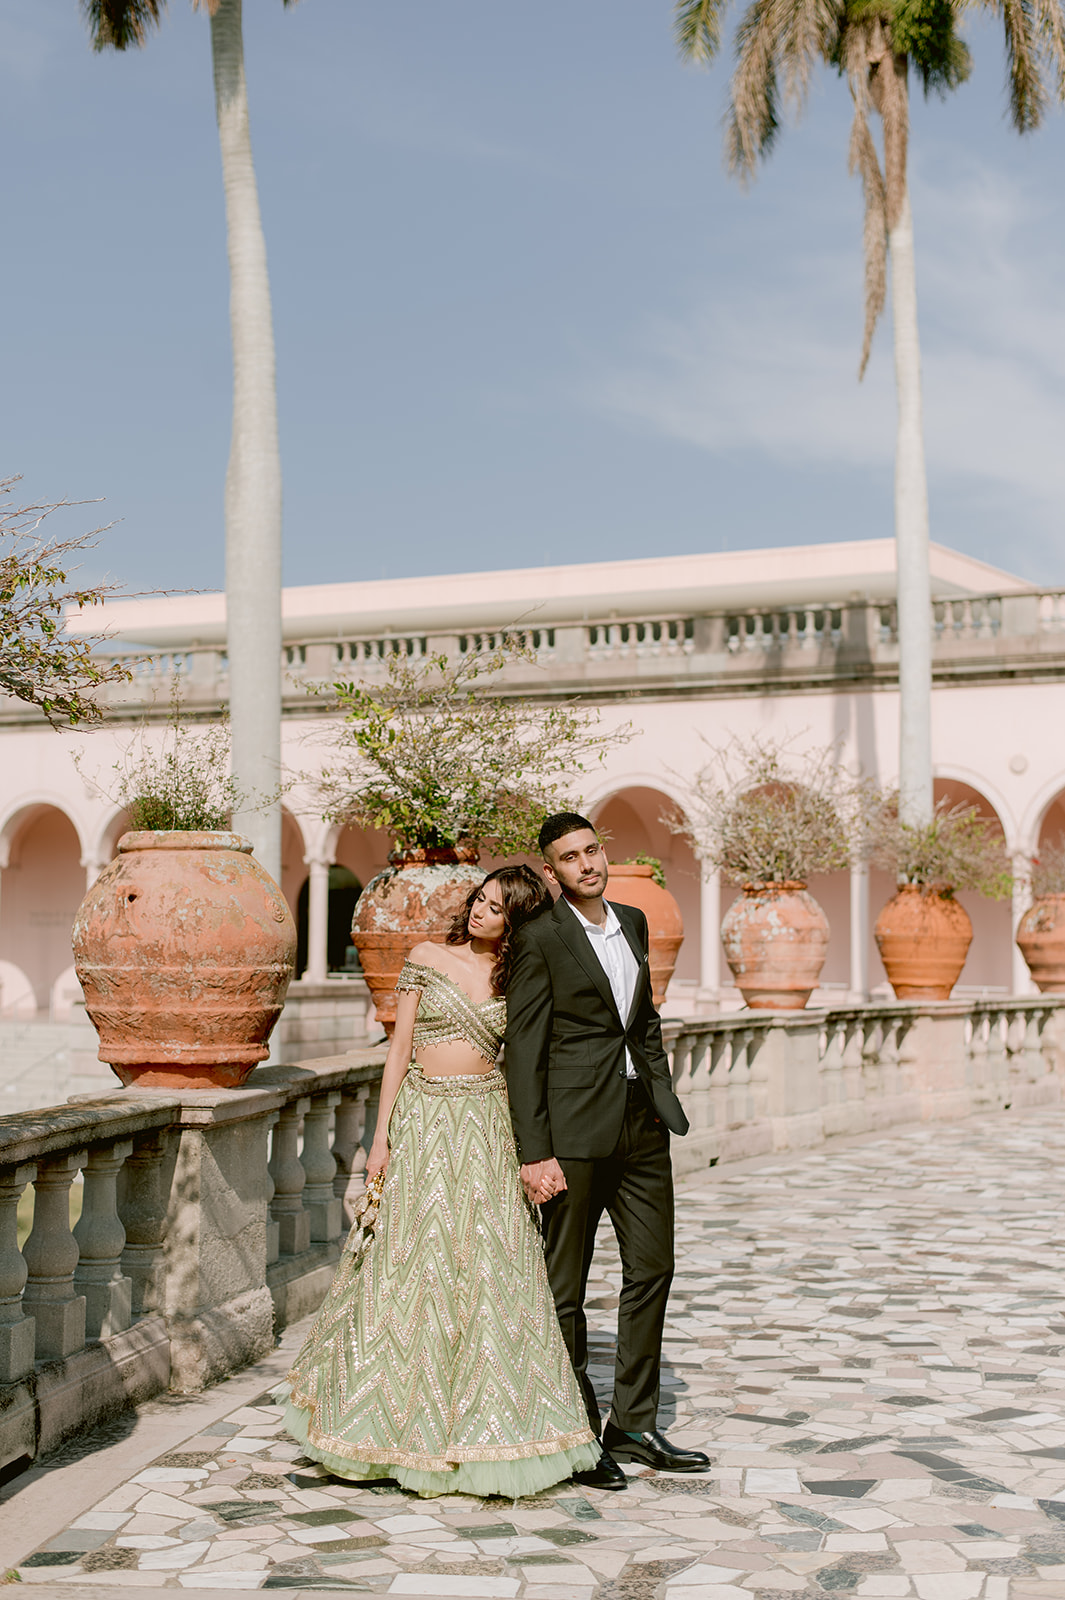 "Indian bride and groom in traditional attire embrace during their engagement session at the Ringling Museum"
